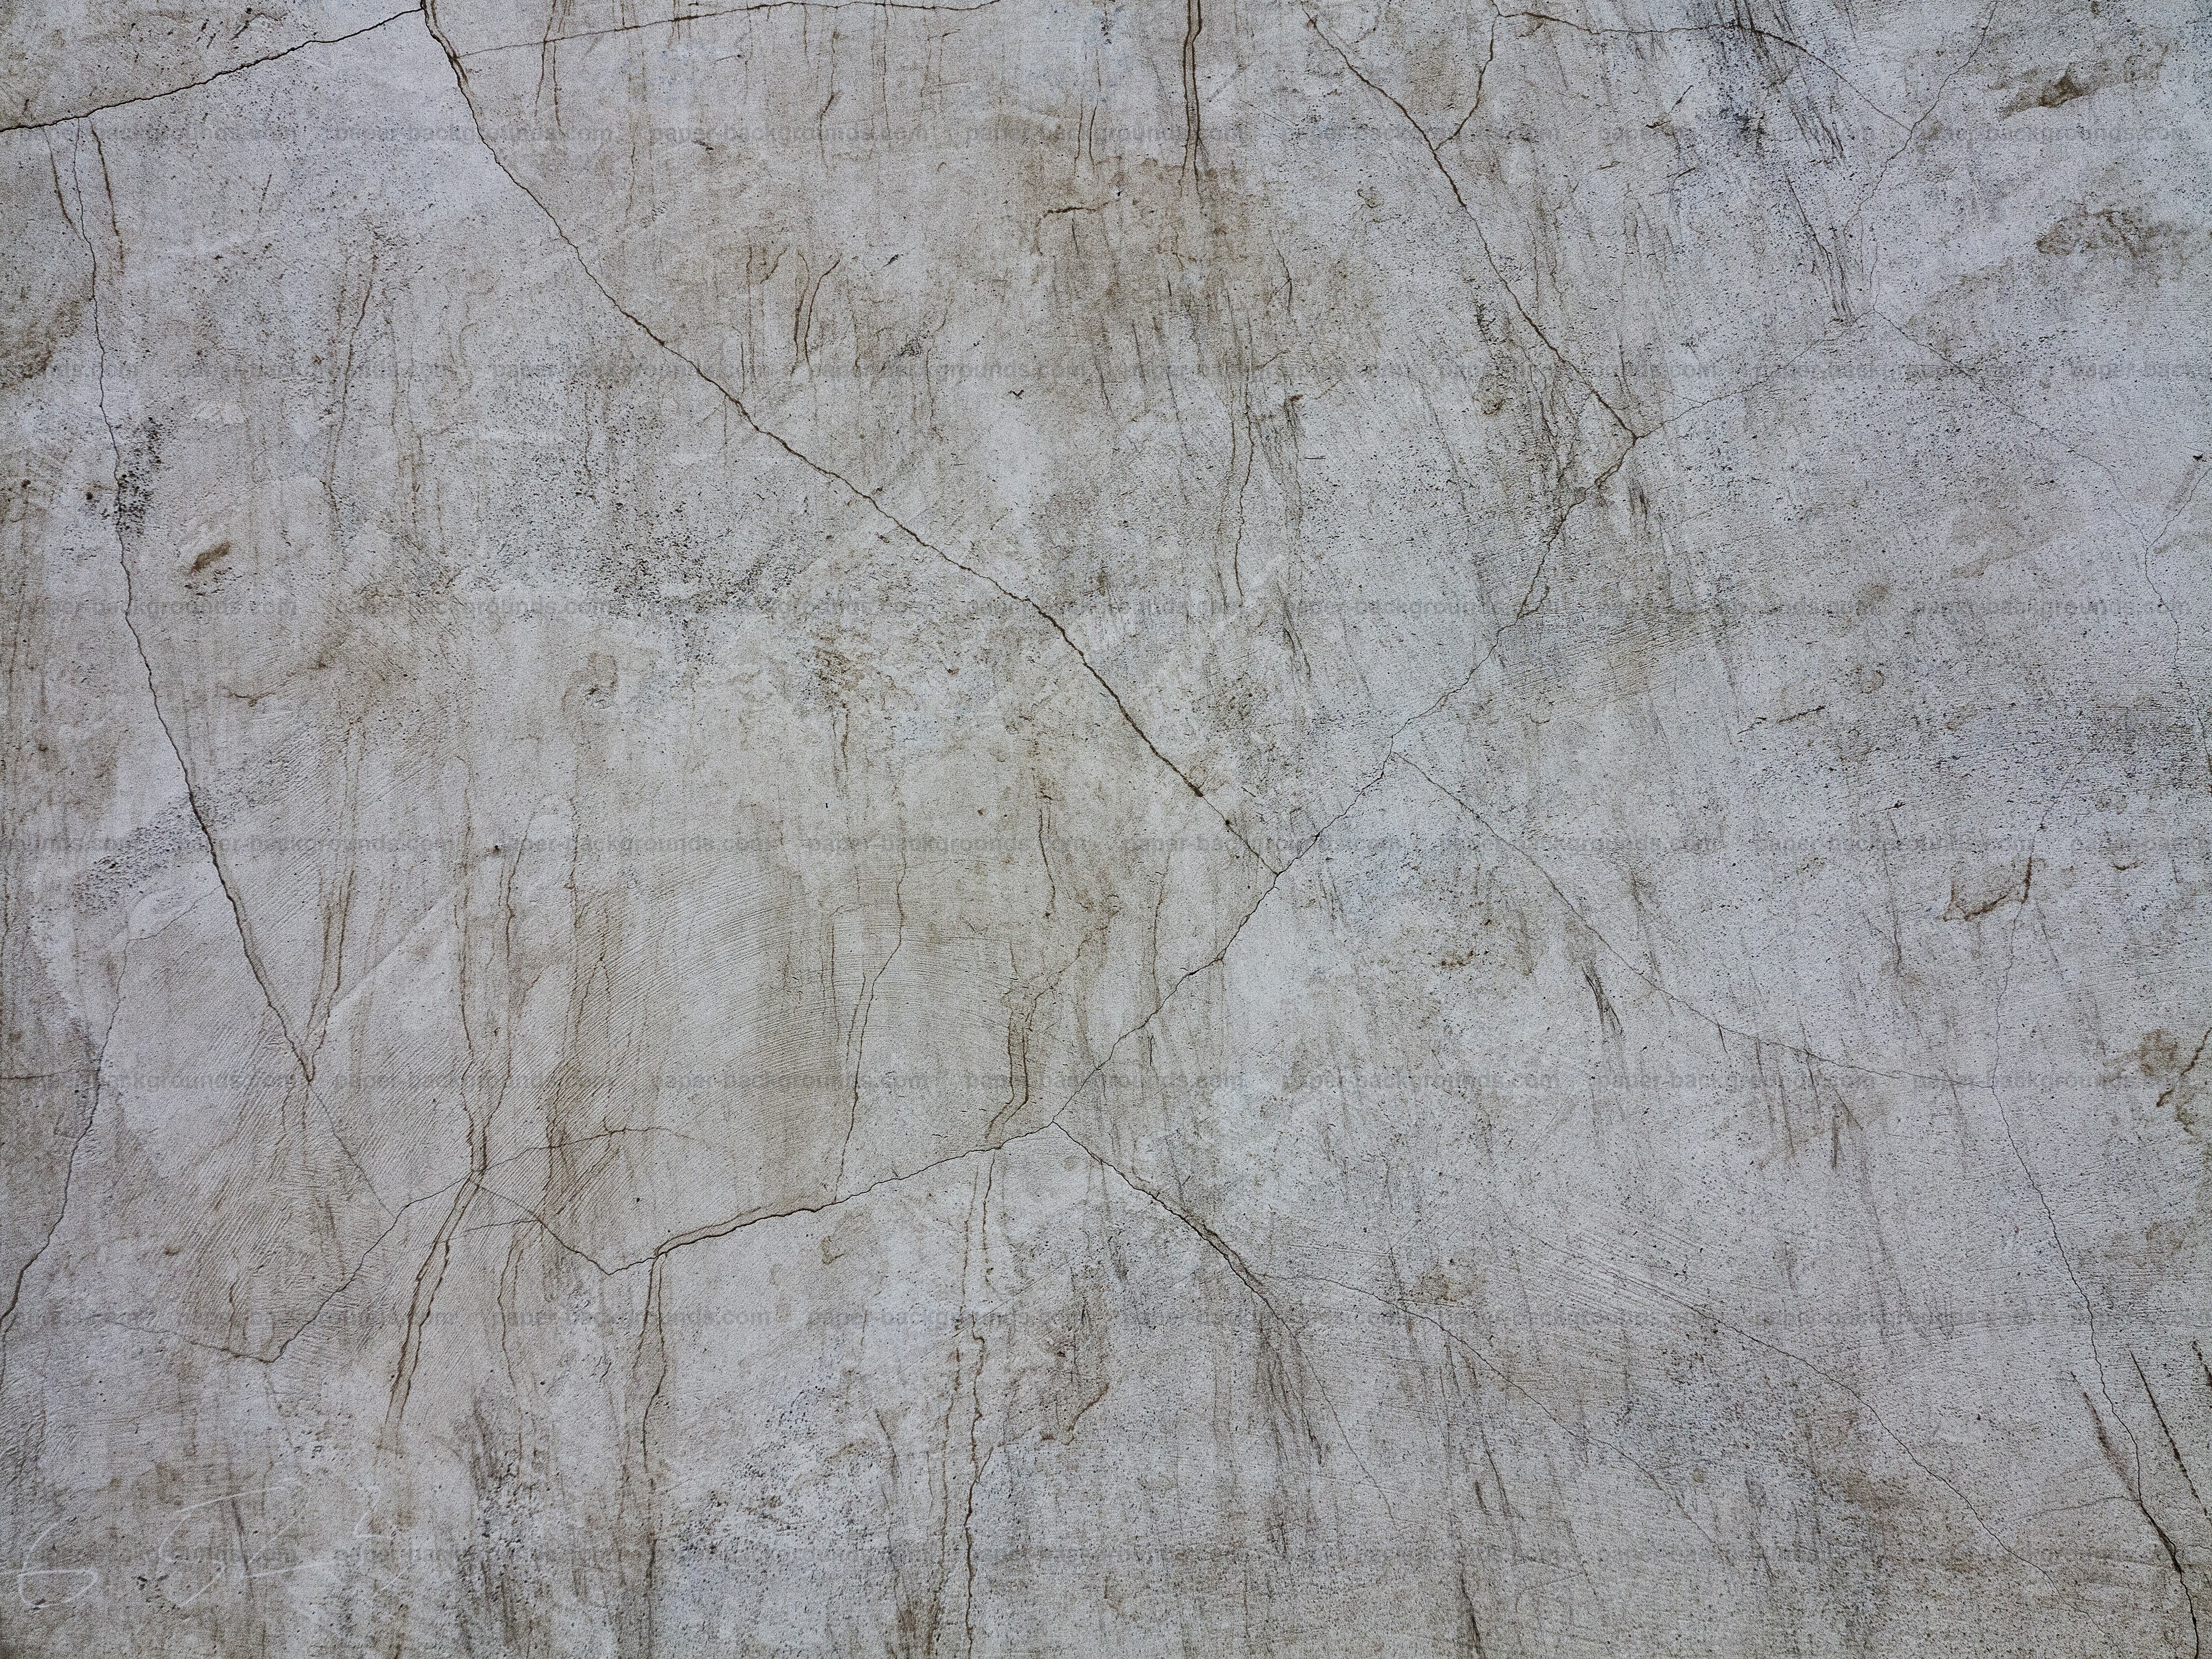 Cracked Dirty Marble Wall Background Paper Background